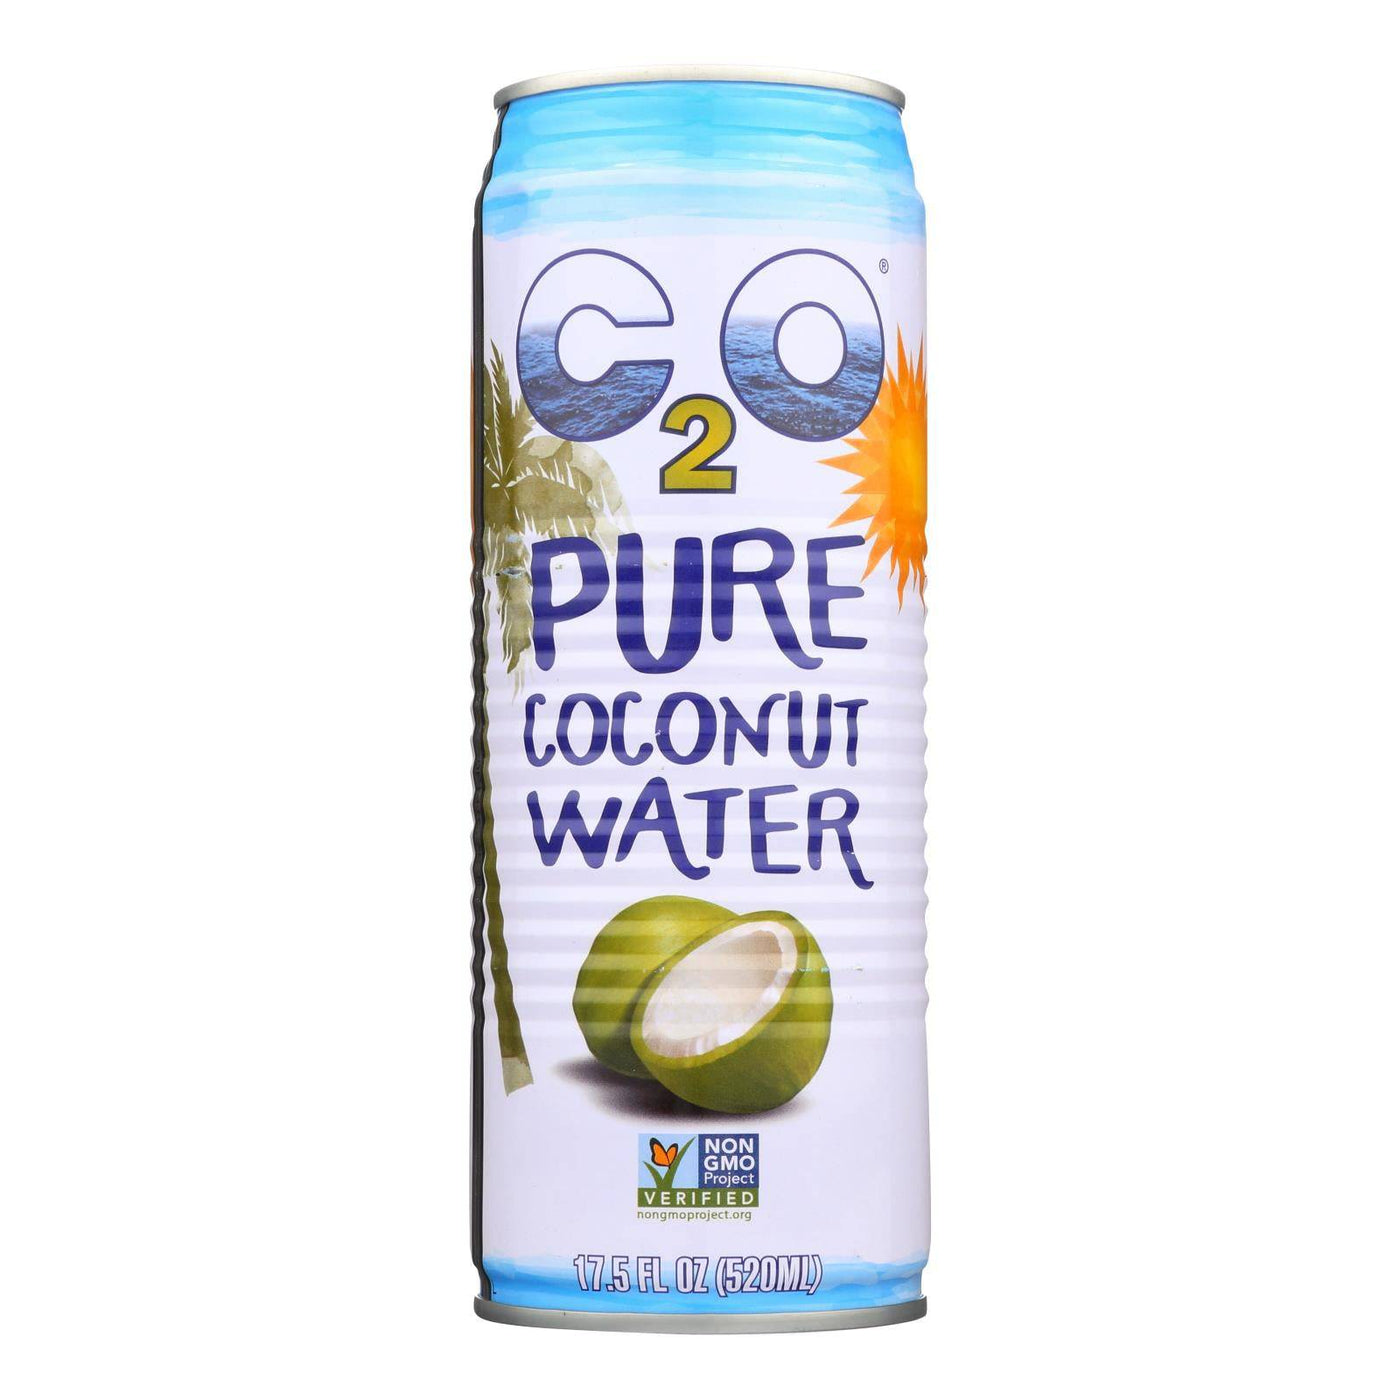 C2o - Pure Coconut Water Pure Coconut Water - Case Of 12 - 17.5 Fl Oz | OnlyNaturals.us